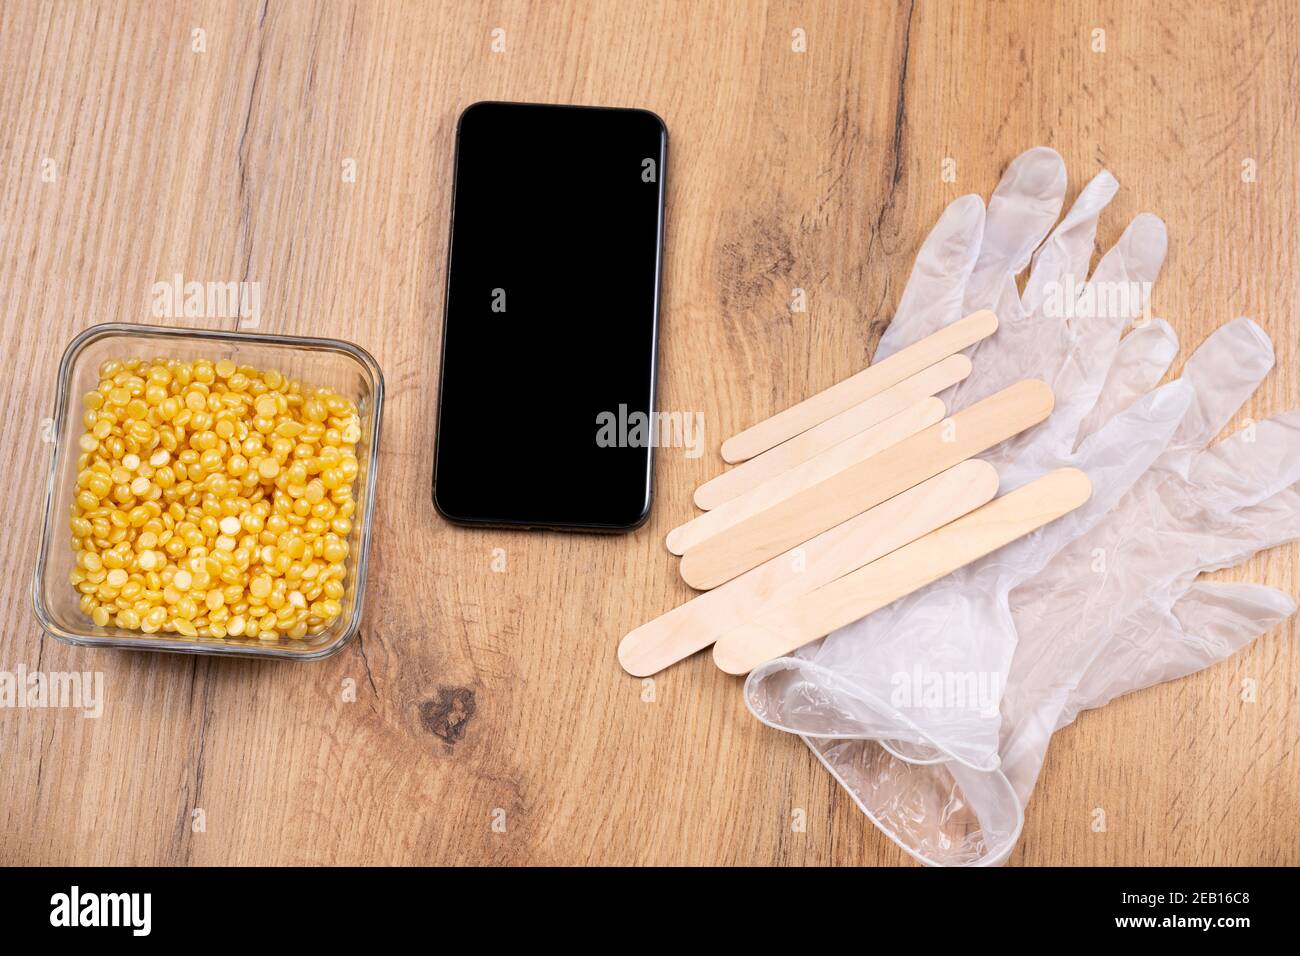 Mock up screen smartphone near depilation waxing set: spatula, medical gloves and pearl wax granules on wooden table background. Technology and beauty Stock Photo